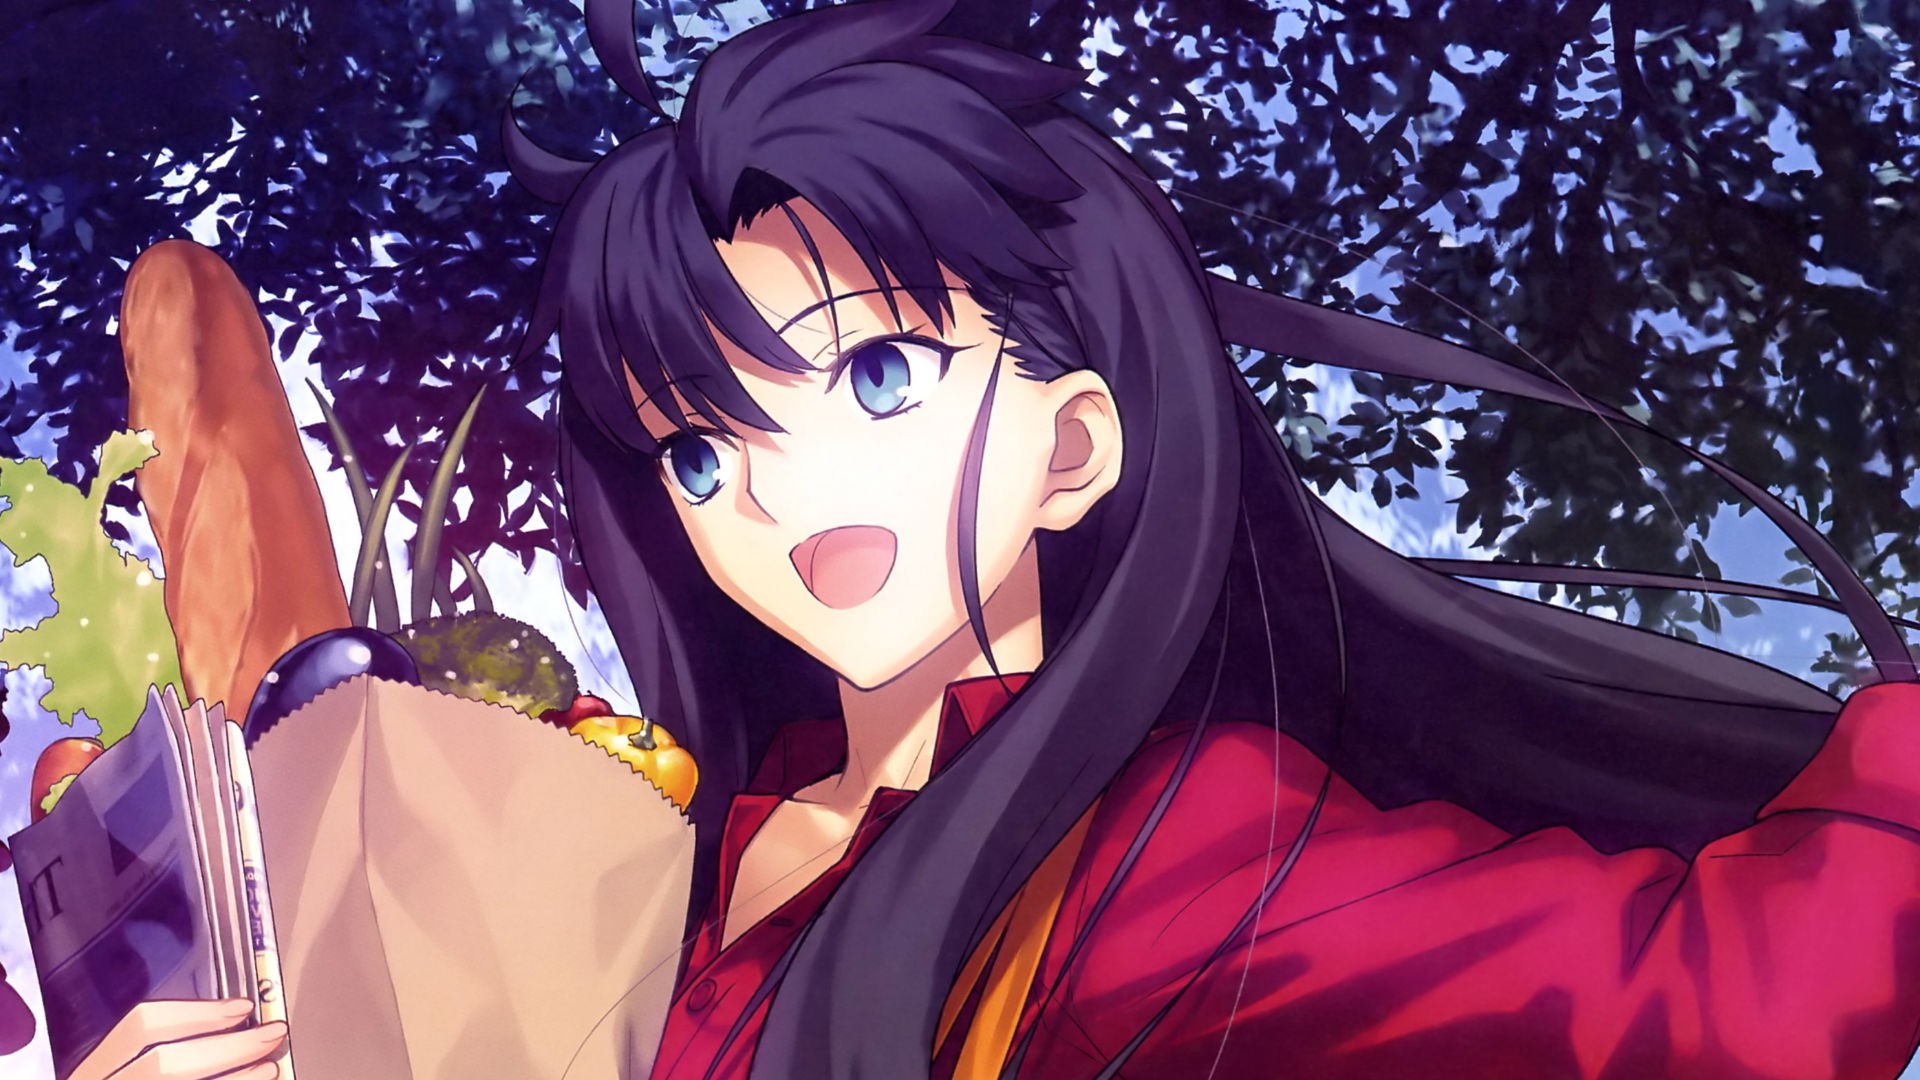 Tohsaka Rin, Fate Series, Black Hair, Long Hair, Open Mouth, Blue Eyes, Shirt, Bread, Pepper, Vegetables, Bangs, Women Outdoors, Type Moon, Leaves, Trees, Newspapers, Happy, Solo, Anime Girls, Looking Away Wallpaper